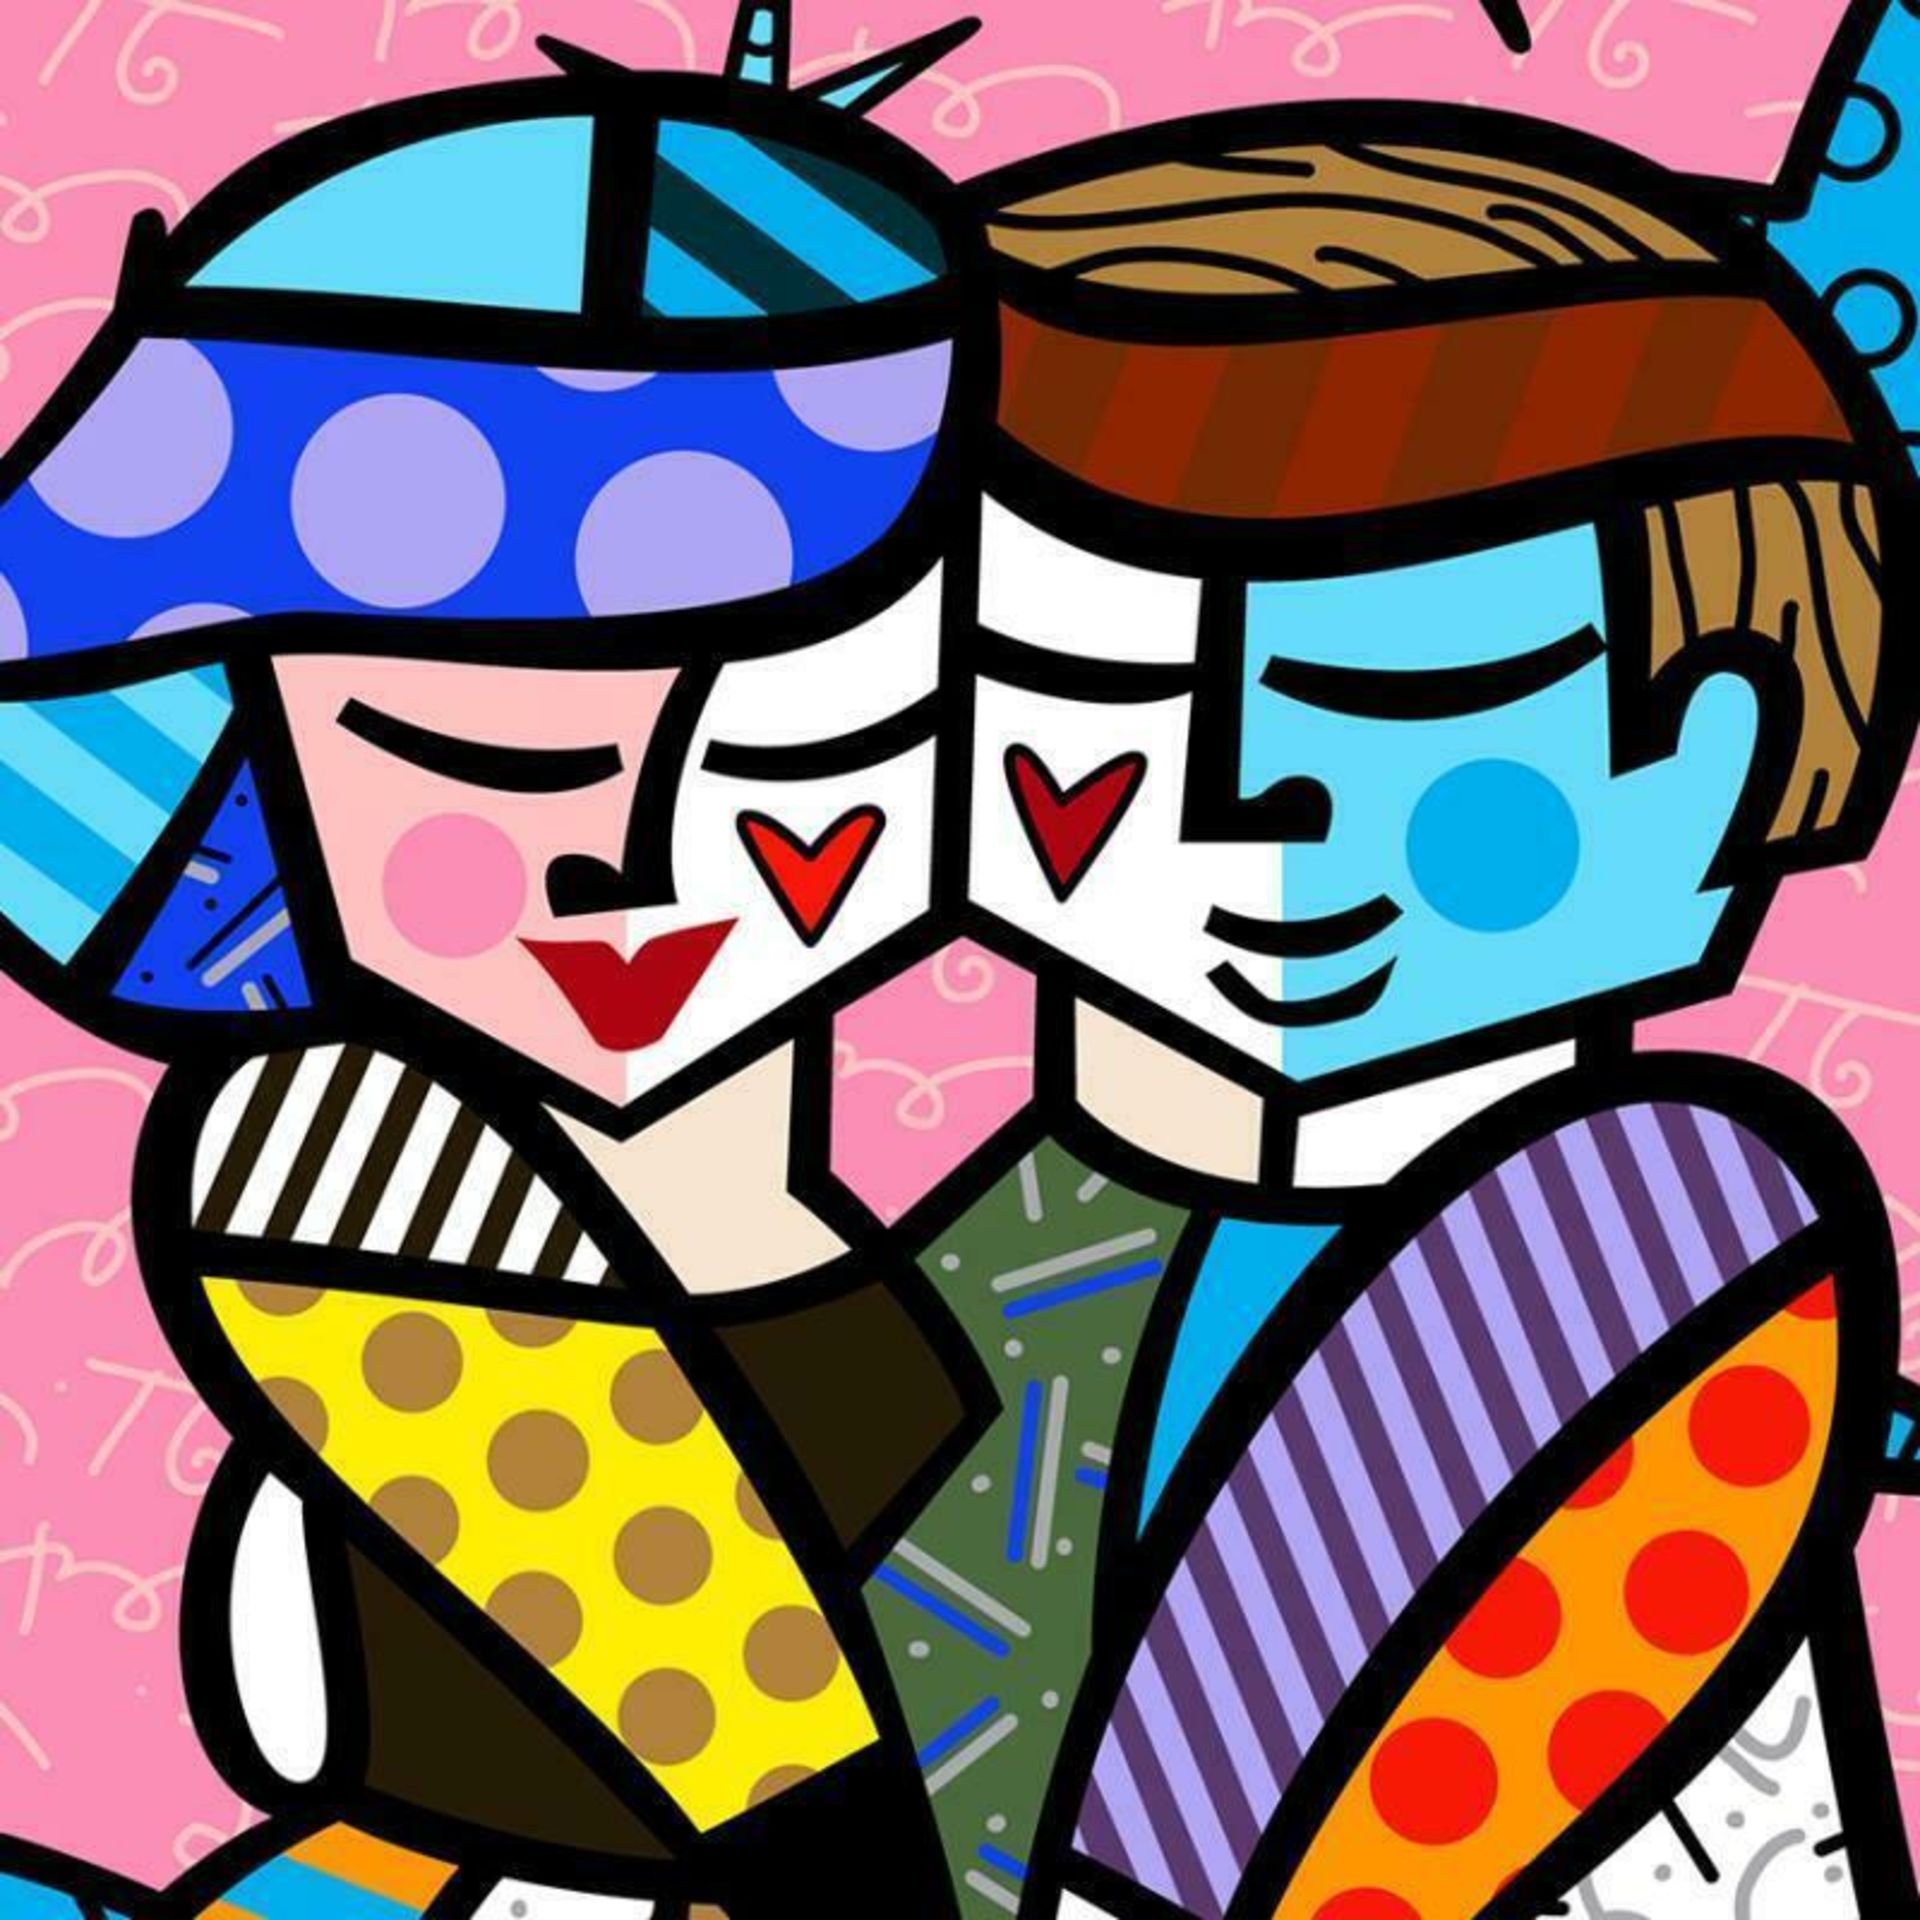 Romero Britto "Pretty In Pink Mini" Hand Signed Giclee on Canvas; Authenticated - Image 2 of 2